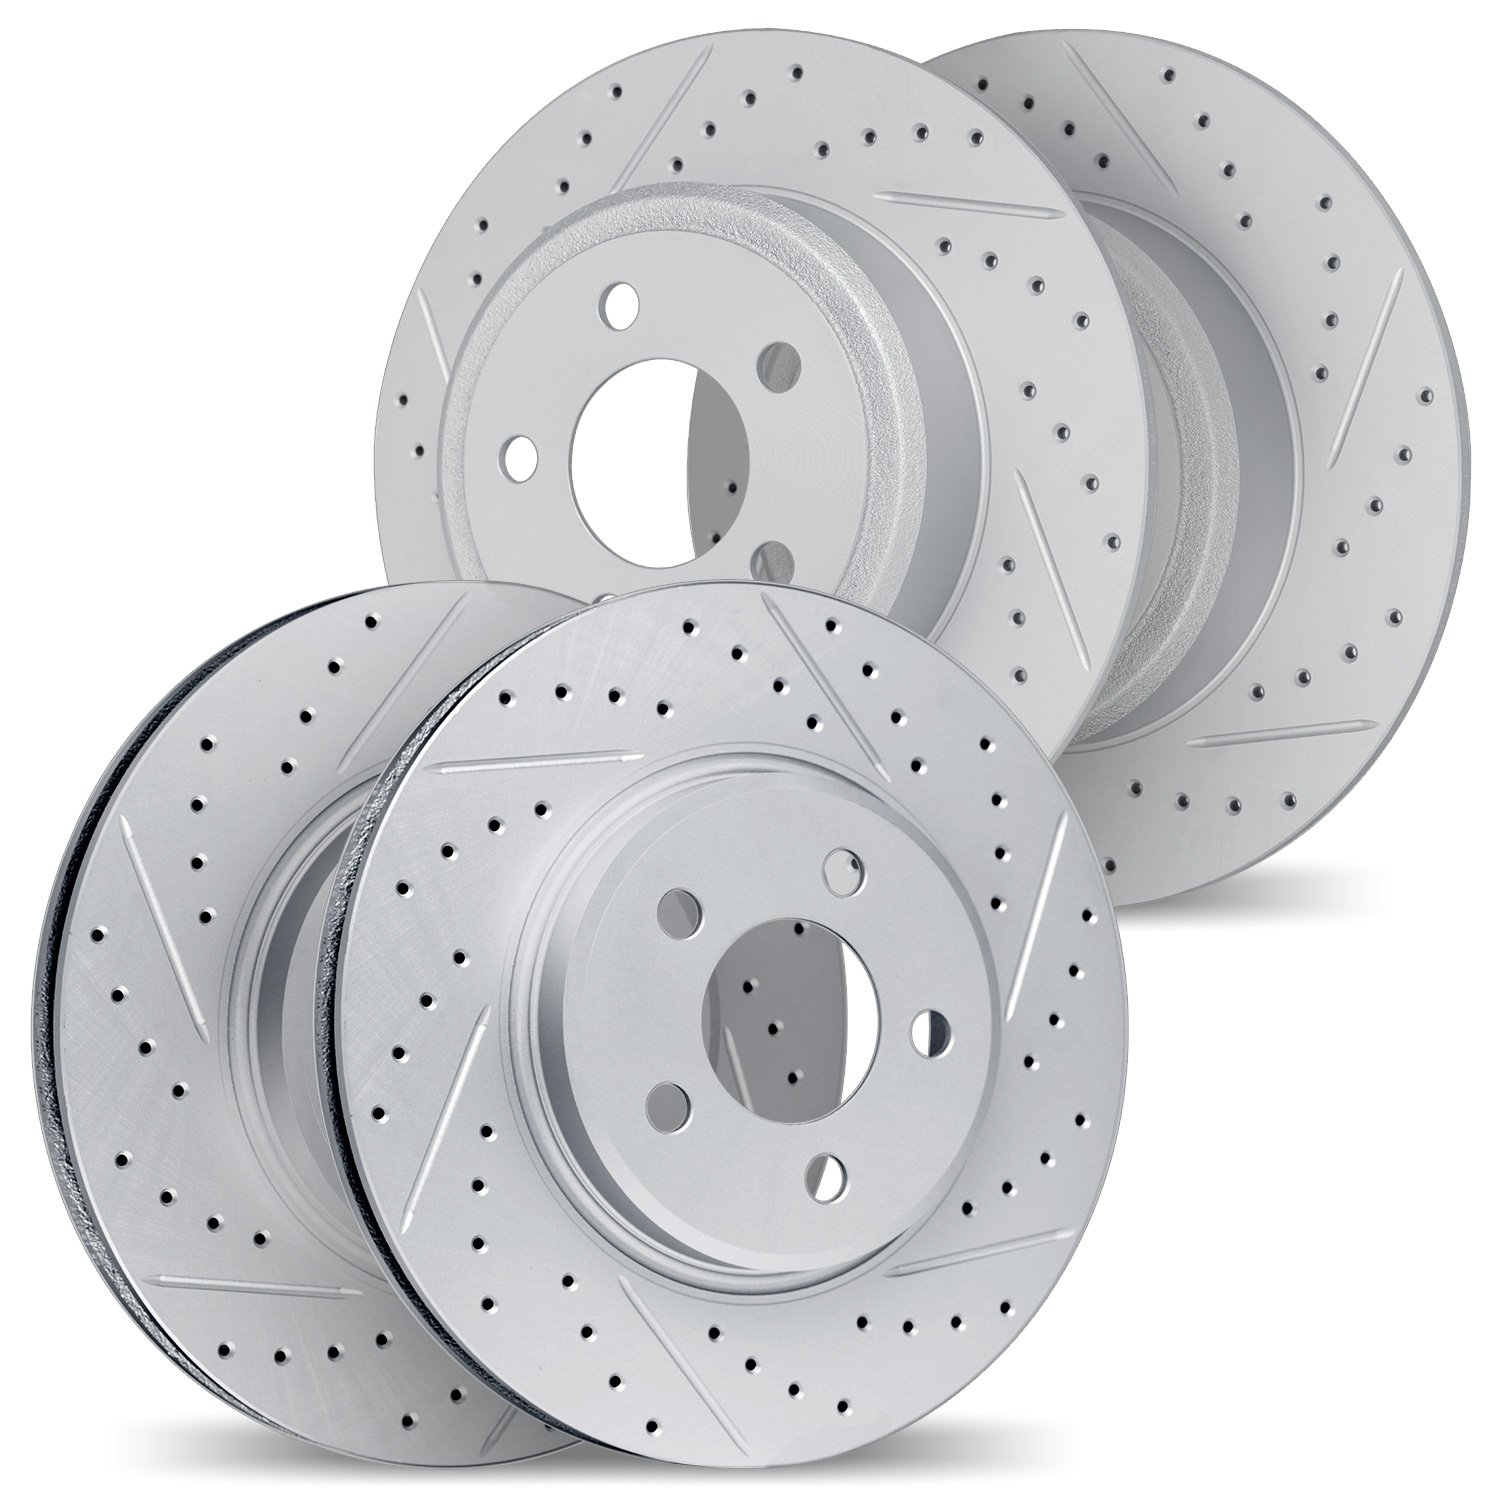 2004-59029 Geoperformance Drilled/Slotted Brake Rotors, 2010-2015 Acura/Honda, Position: Front and Rear